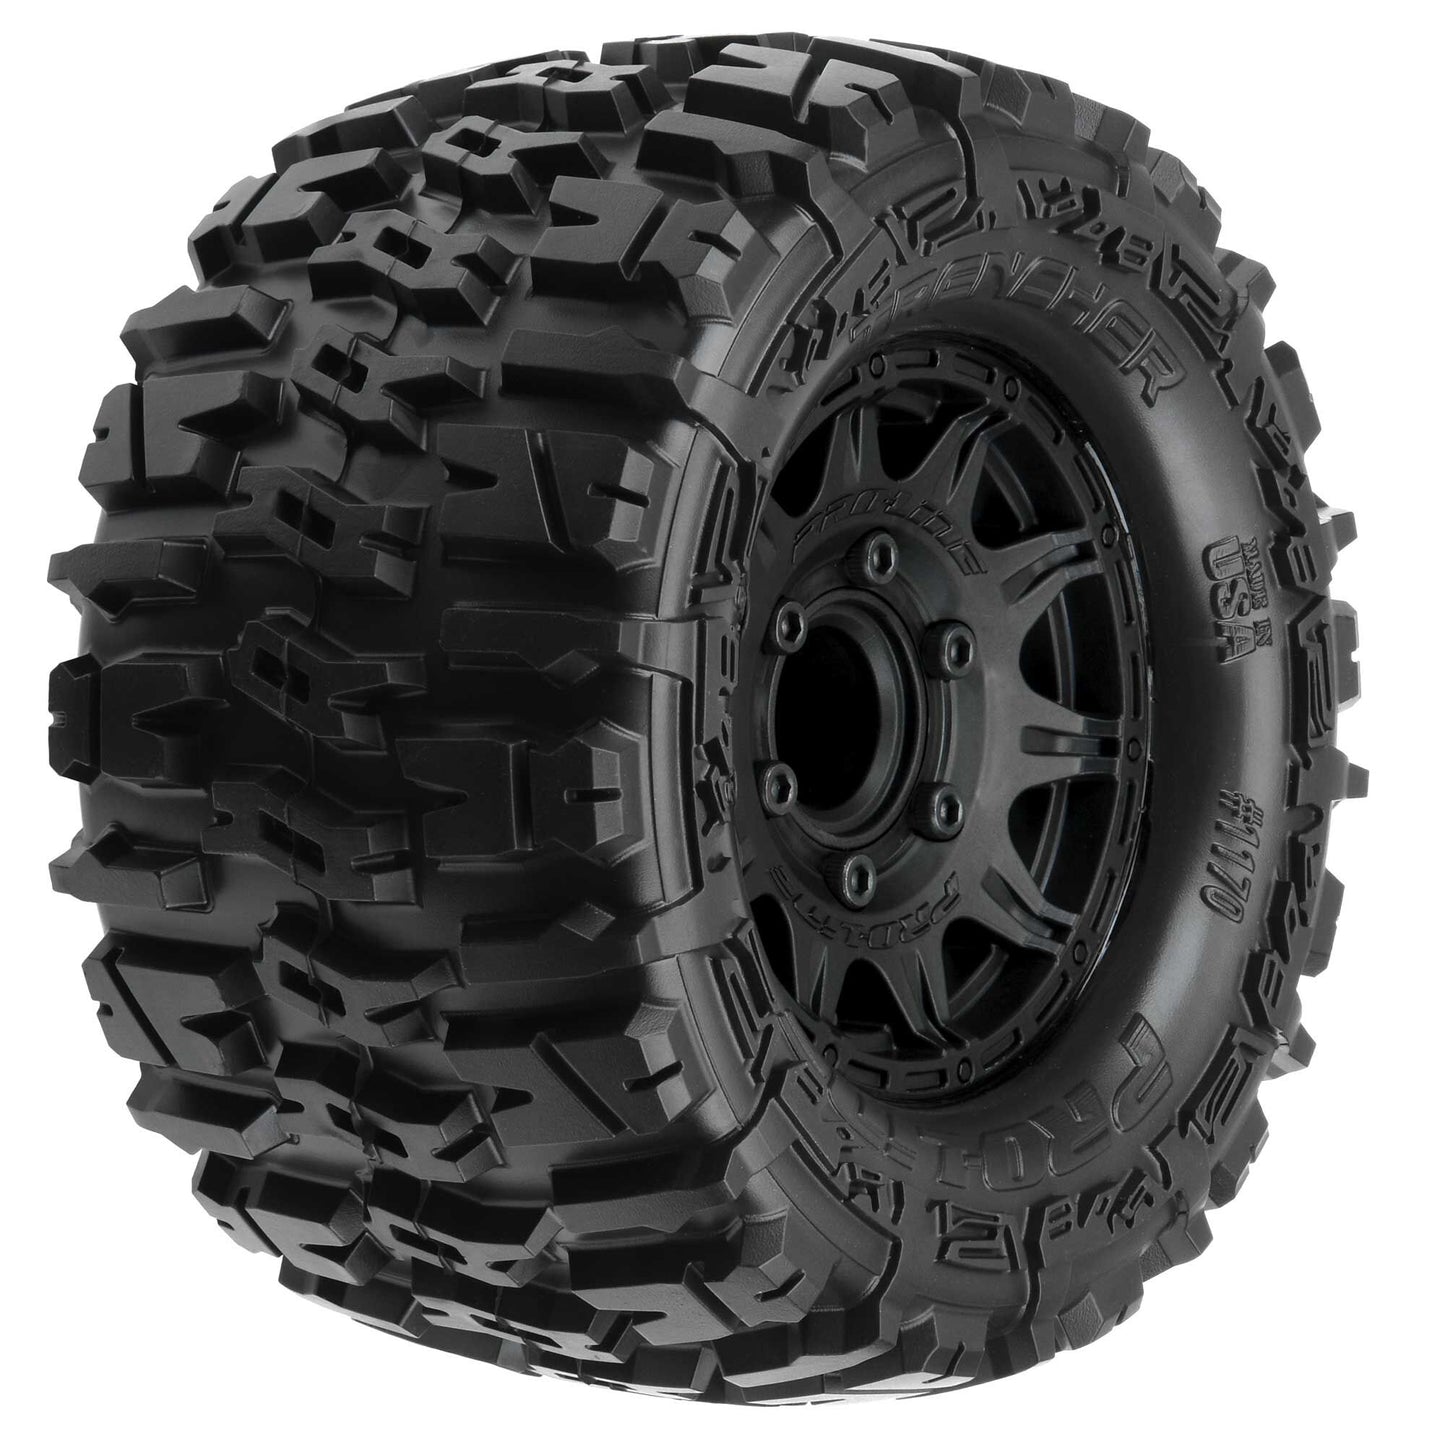 1/10 Trencher Front/Rear 2.8" MT Tires Mounted 12mm Blk Raid (2)